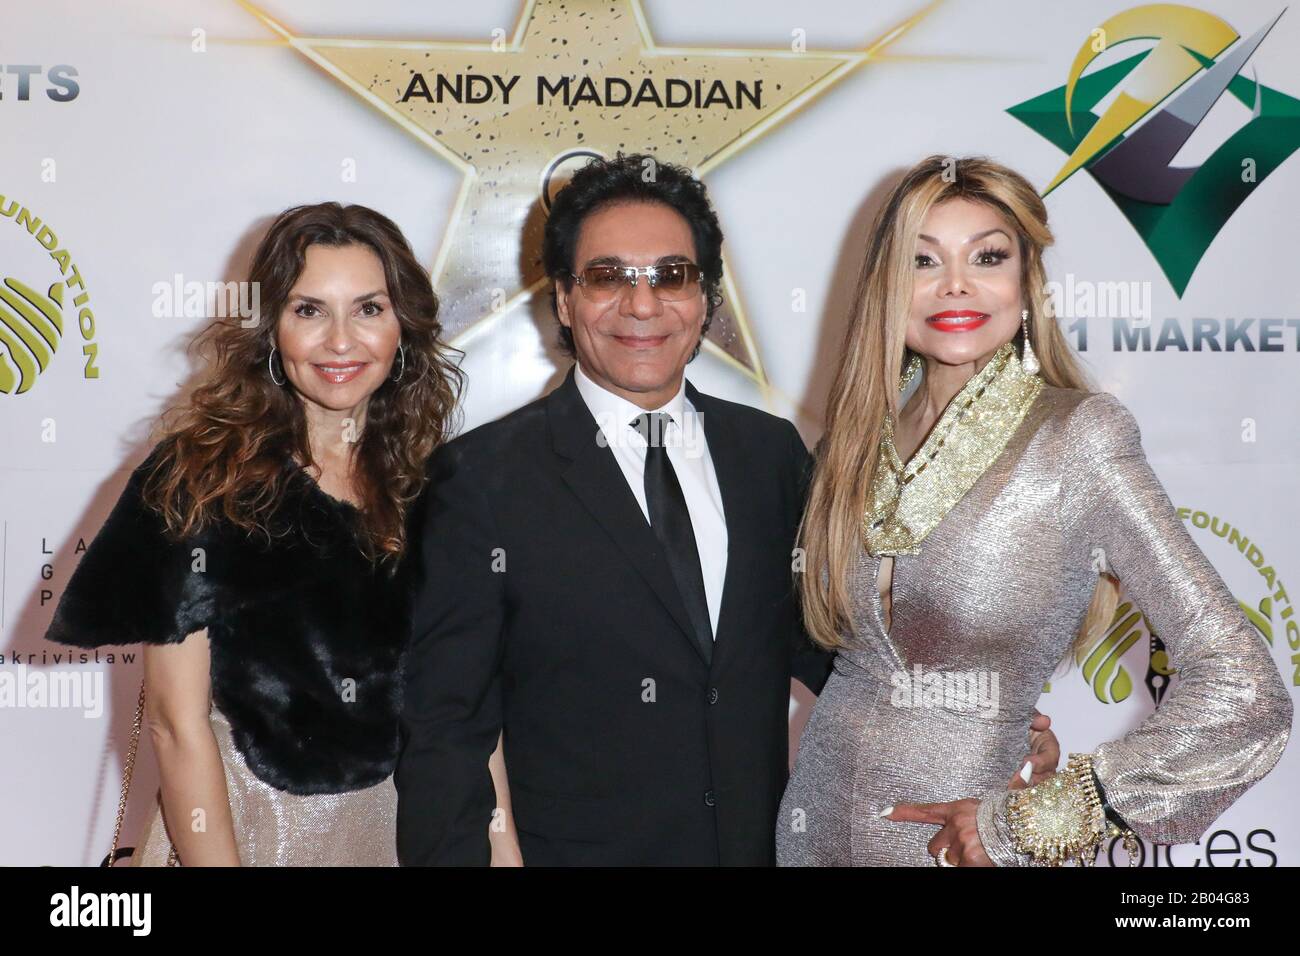 Andy Madadian Walk of Fame Star After Party at the Hollywood Museum in Hollywood, California on January 17, 2020 Featuring: Shani Rigsbee, Andy Madadian, La Toya Jackson Where: Hollywood, California, United States When: 17 Jan 2020 Credit: Sheri Determan/WENN.com Stock Photo